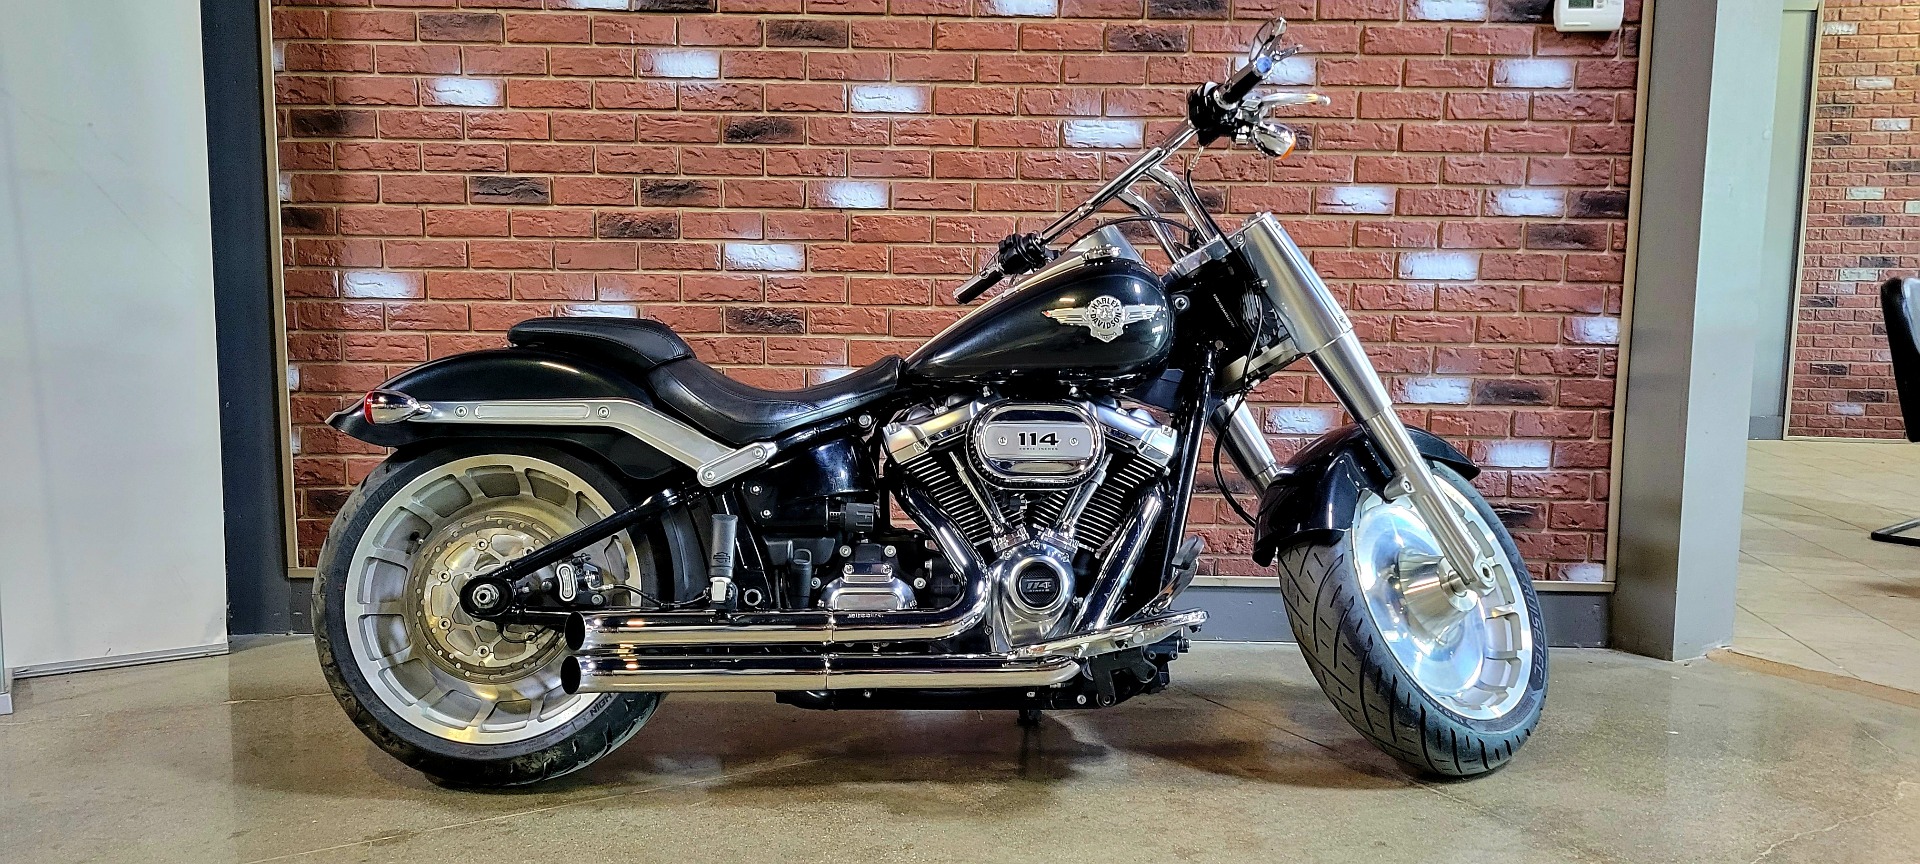 2018 Harley Davidson Softail Deluxe Motorcycle For Sale Softail Softail Deluxe Harley Davidson